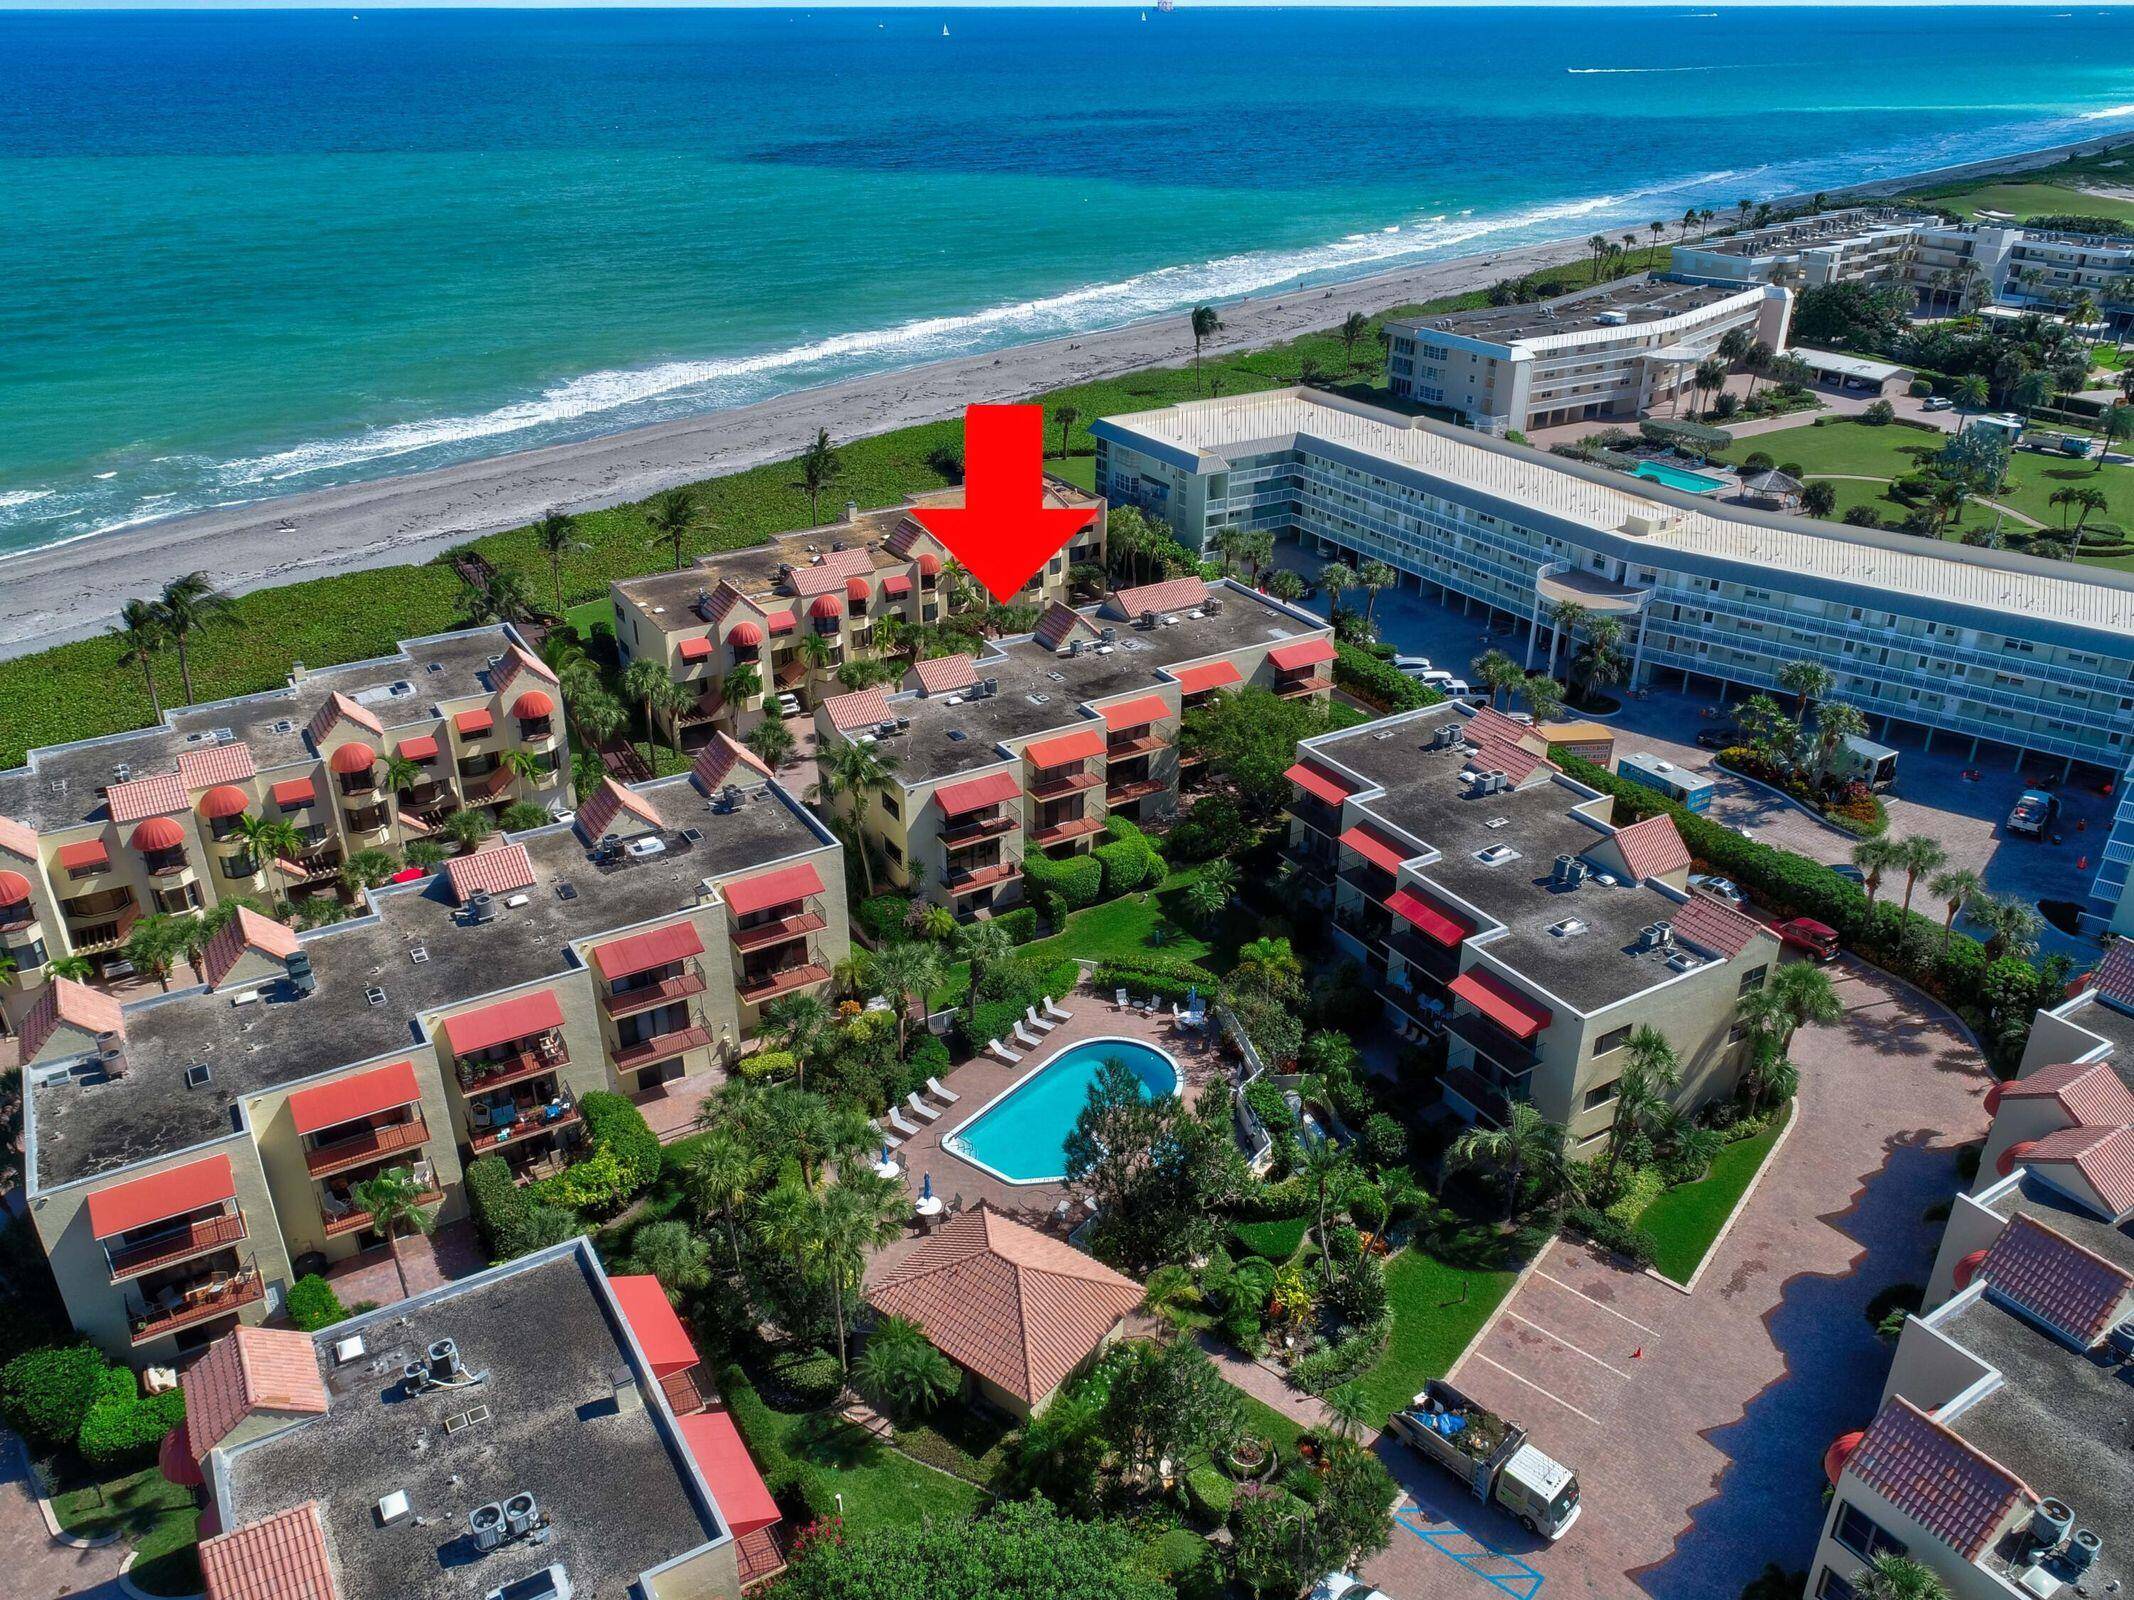 3 story turnkey townhome located in a gated community steps from the ocean.